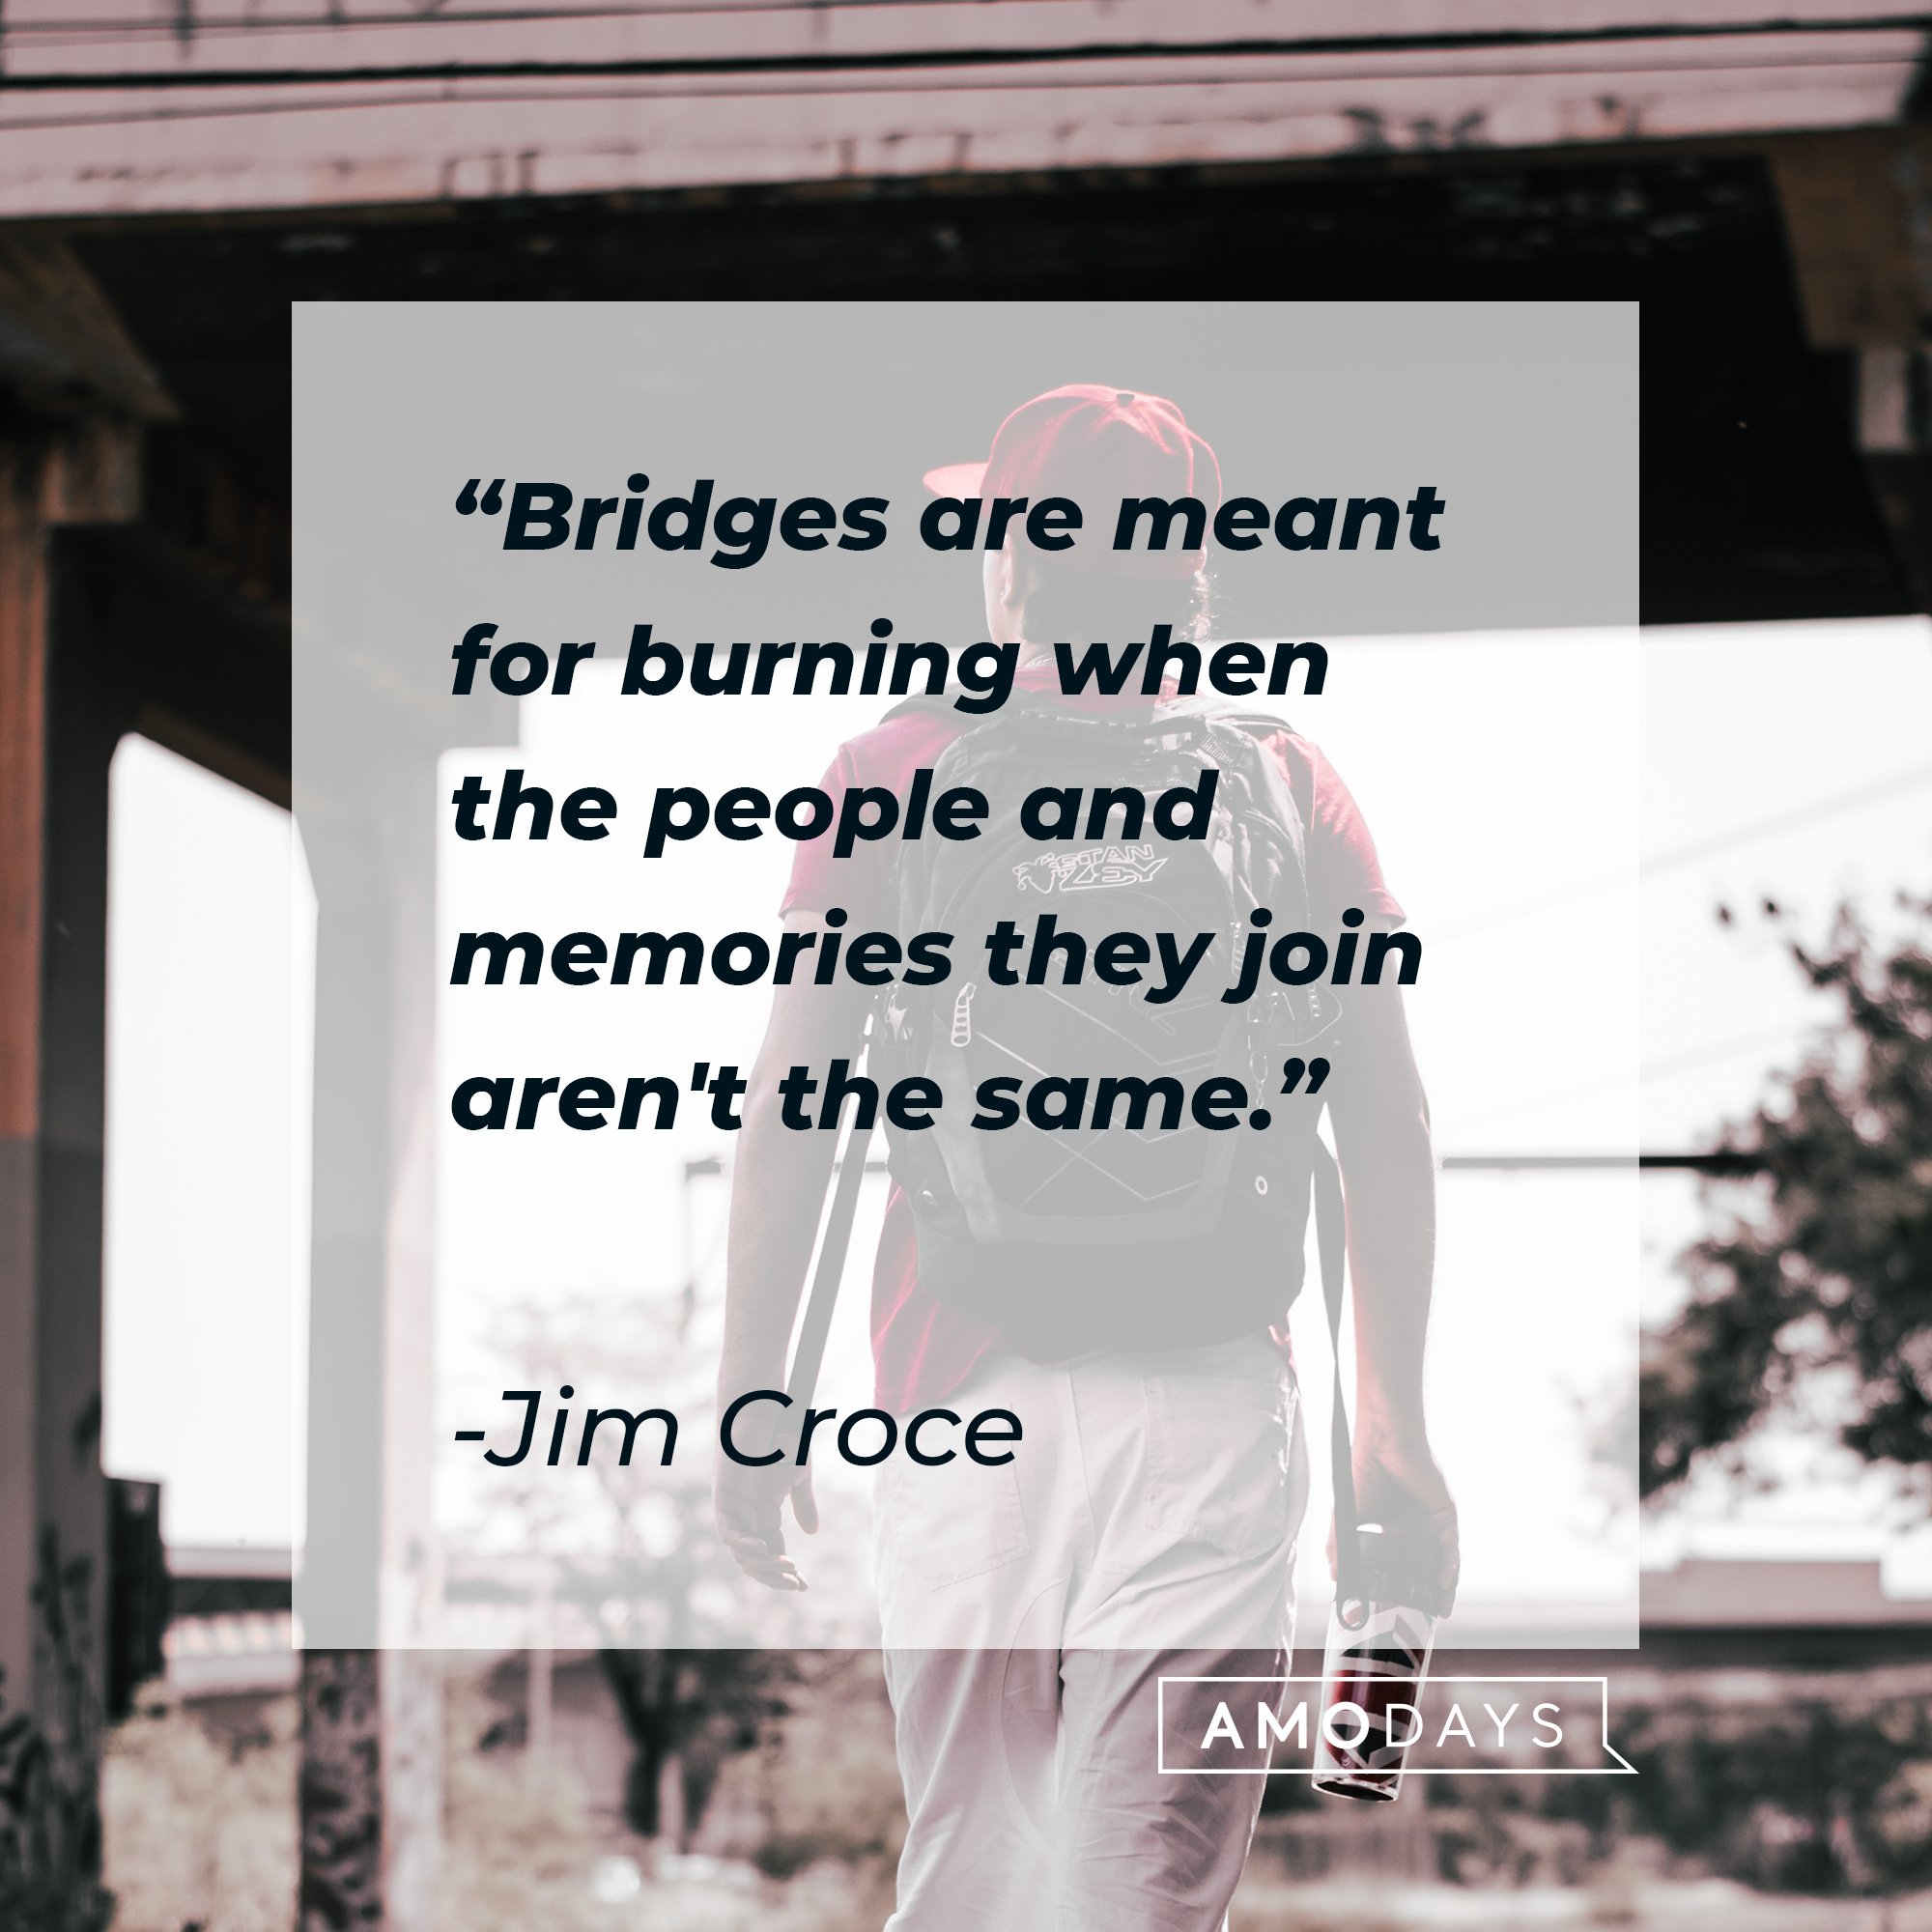 Jim Croce’s quote: "Bridges are meant for burning when the people and memories they join aren't the same." | Image: AmoDays